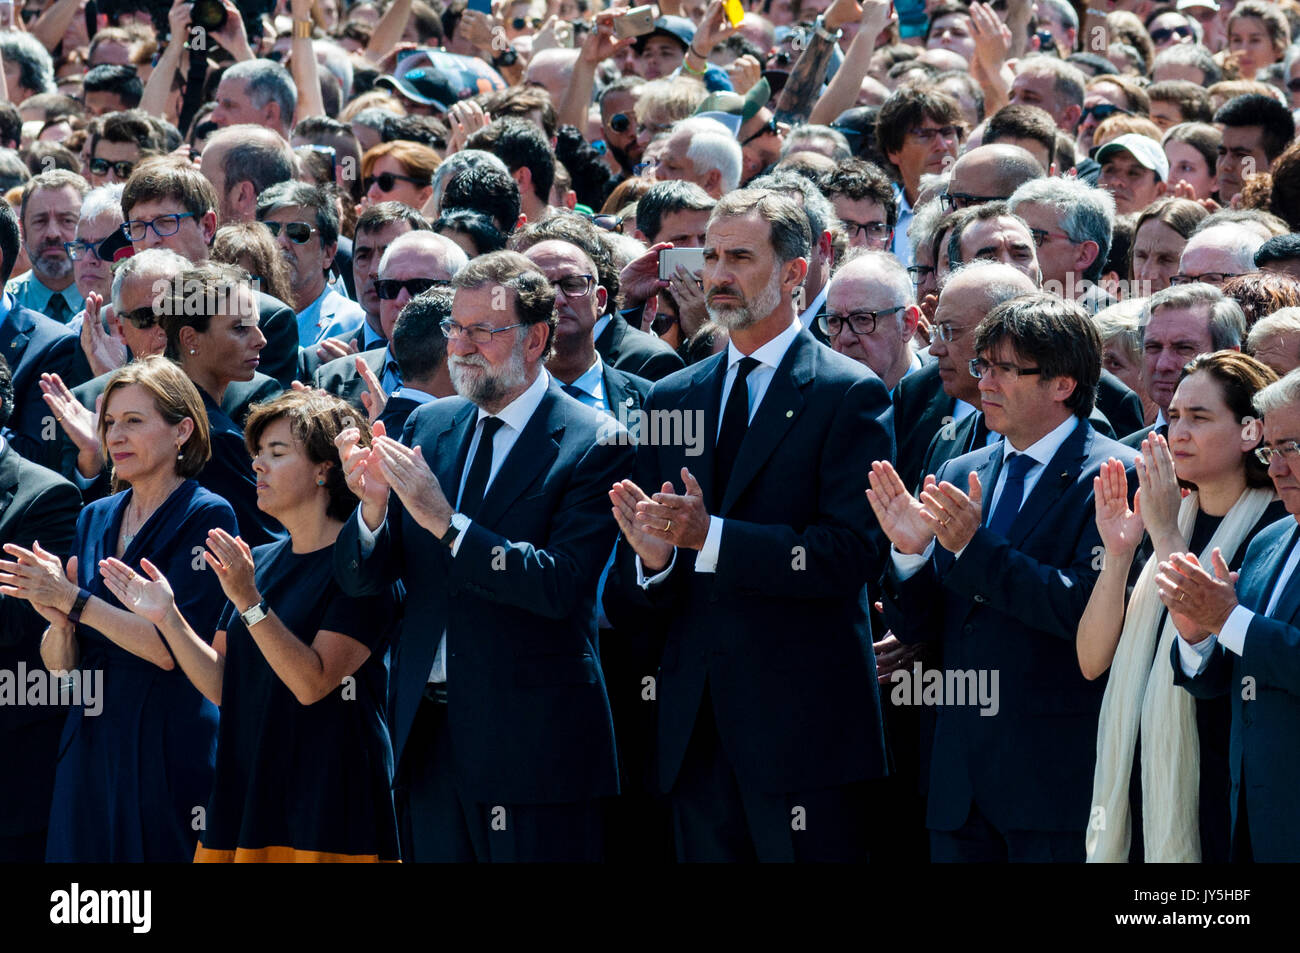 Barcelona, Spain. 18 August 2017. (From left to right) President of the Parliament of Catalonia Carme Forcadell, Spanish Deputy Prime Minister Soraya Saenz de Santamaría; Prime Minister, Mariano Rajoy; King Philip VI of Spain; Regional President of Catalonia, Carles Puigdemont; The mayor of Barcelona, Ada Colau; Making a minute of silence in the Plaza de Catalunya, in homage to the victims of the terrorist attack in Barcelona and Cambrils. Credit: Cisco Pelay / Alamy Live News Stock Photo